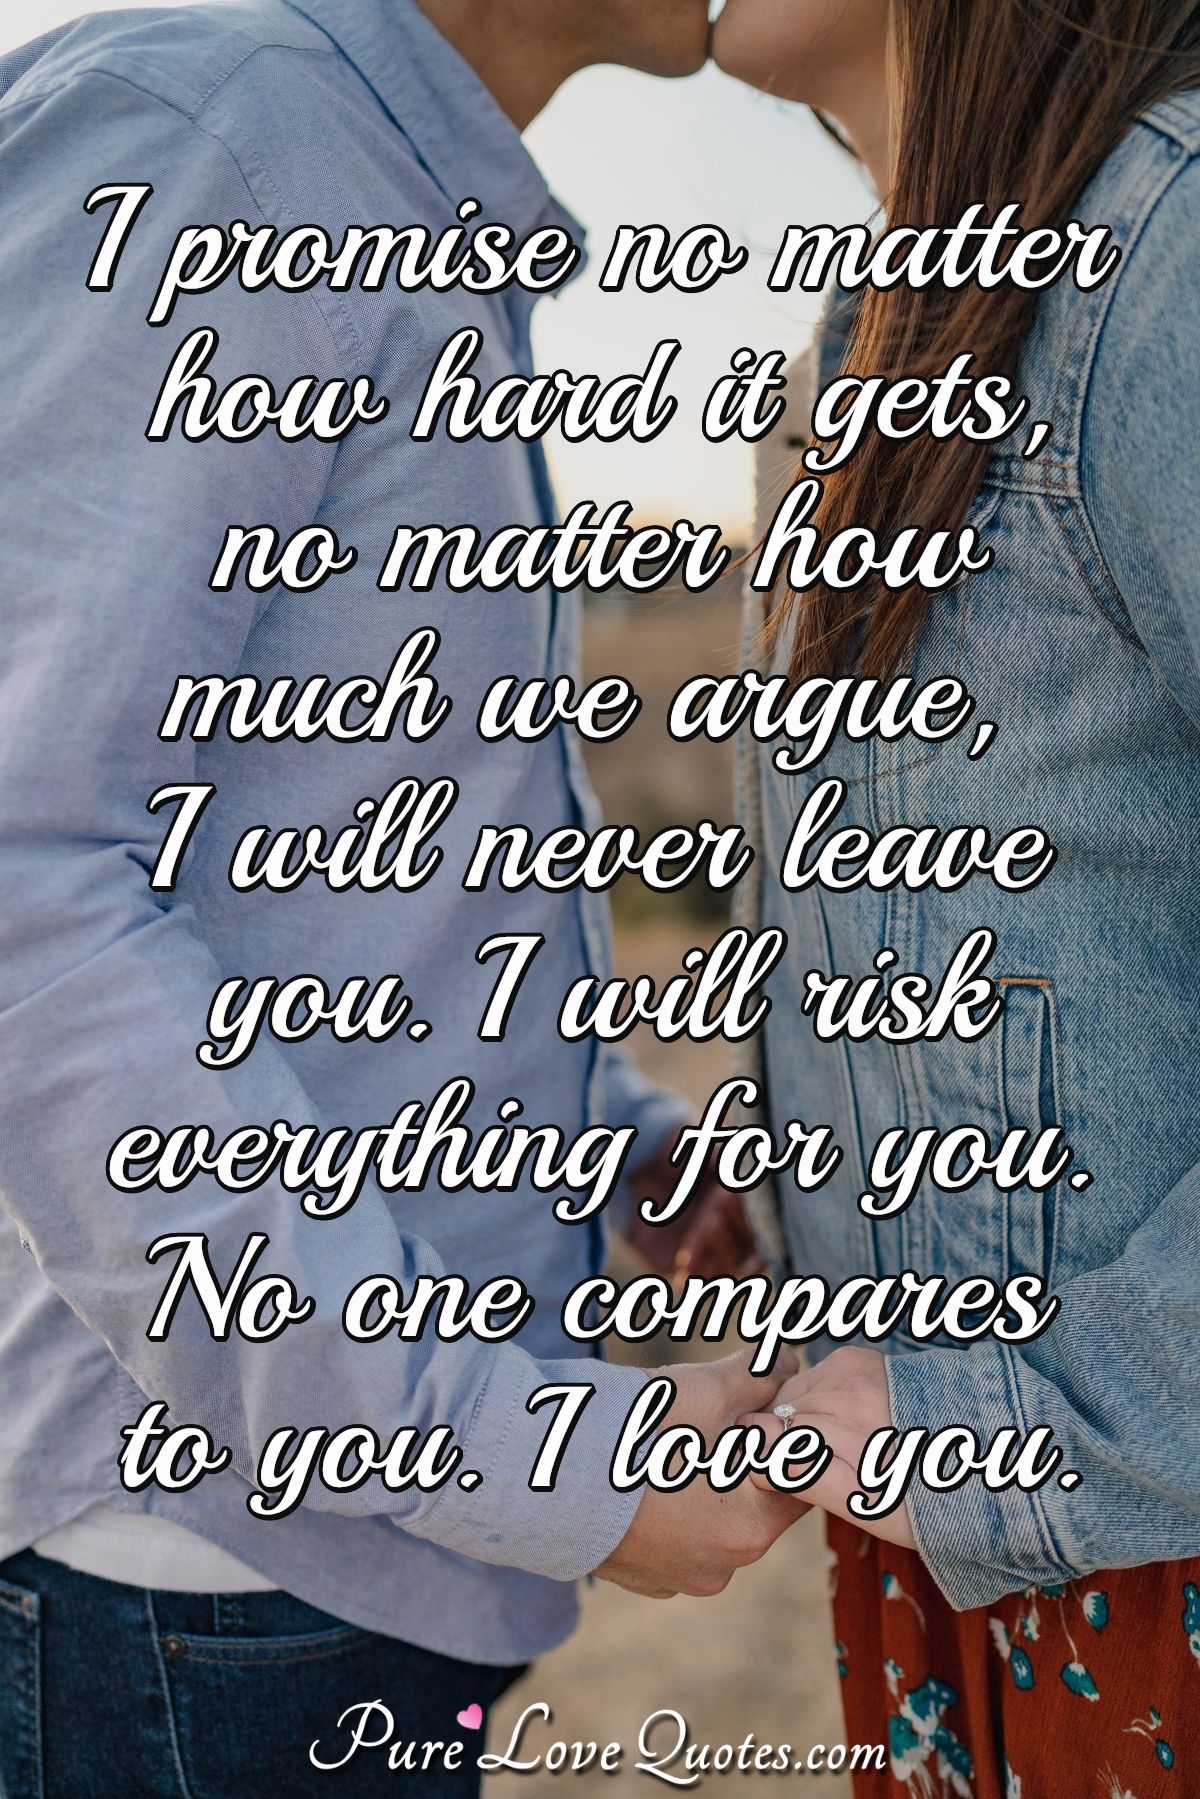 139 I Love You Quotes (For Him and Her) | PureLoveQuotes